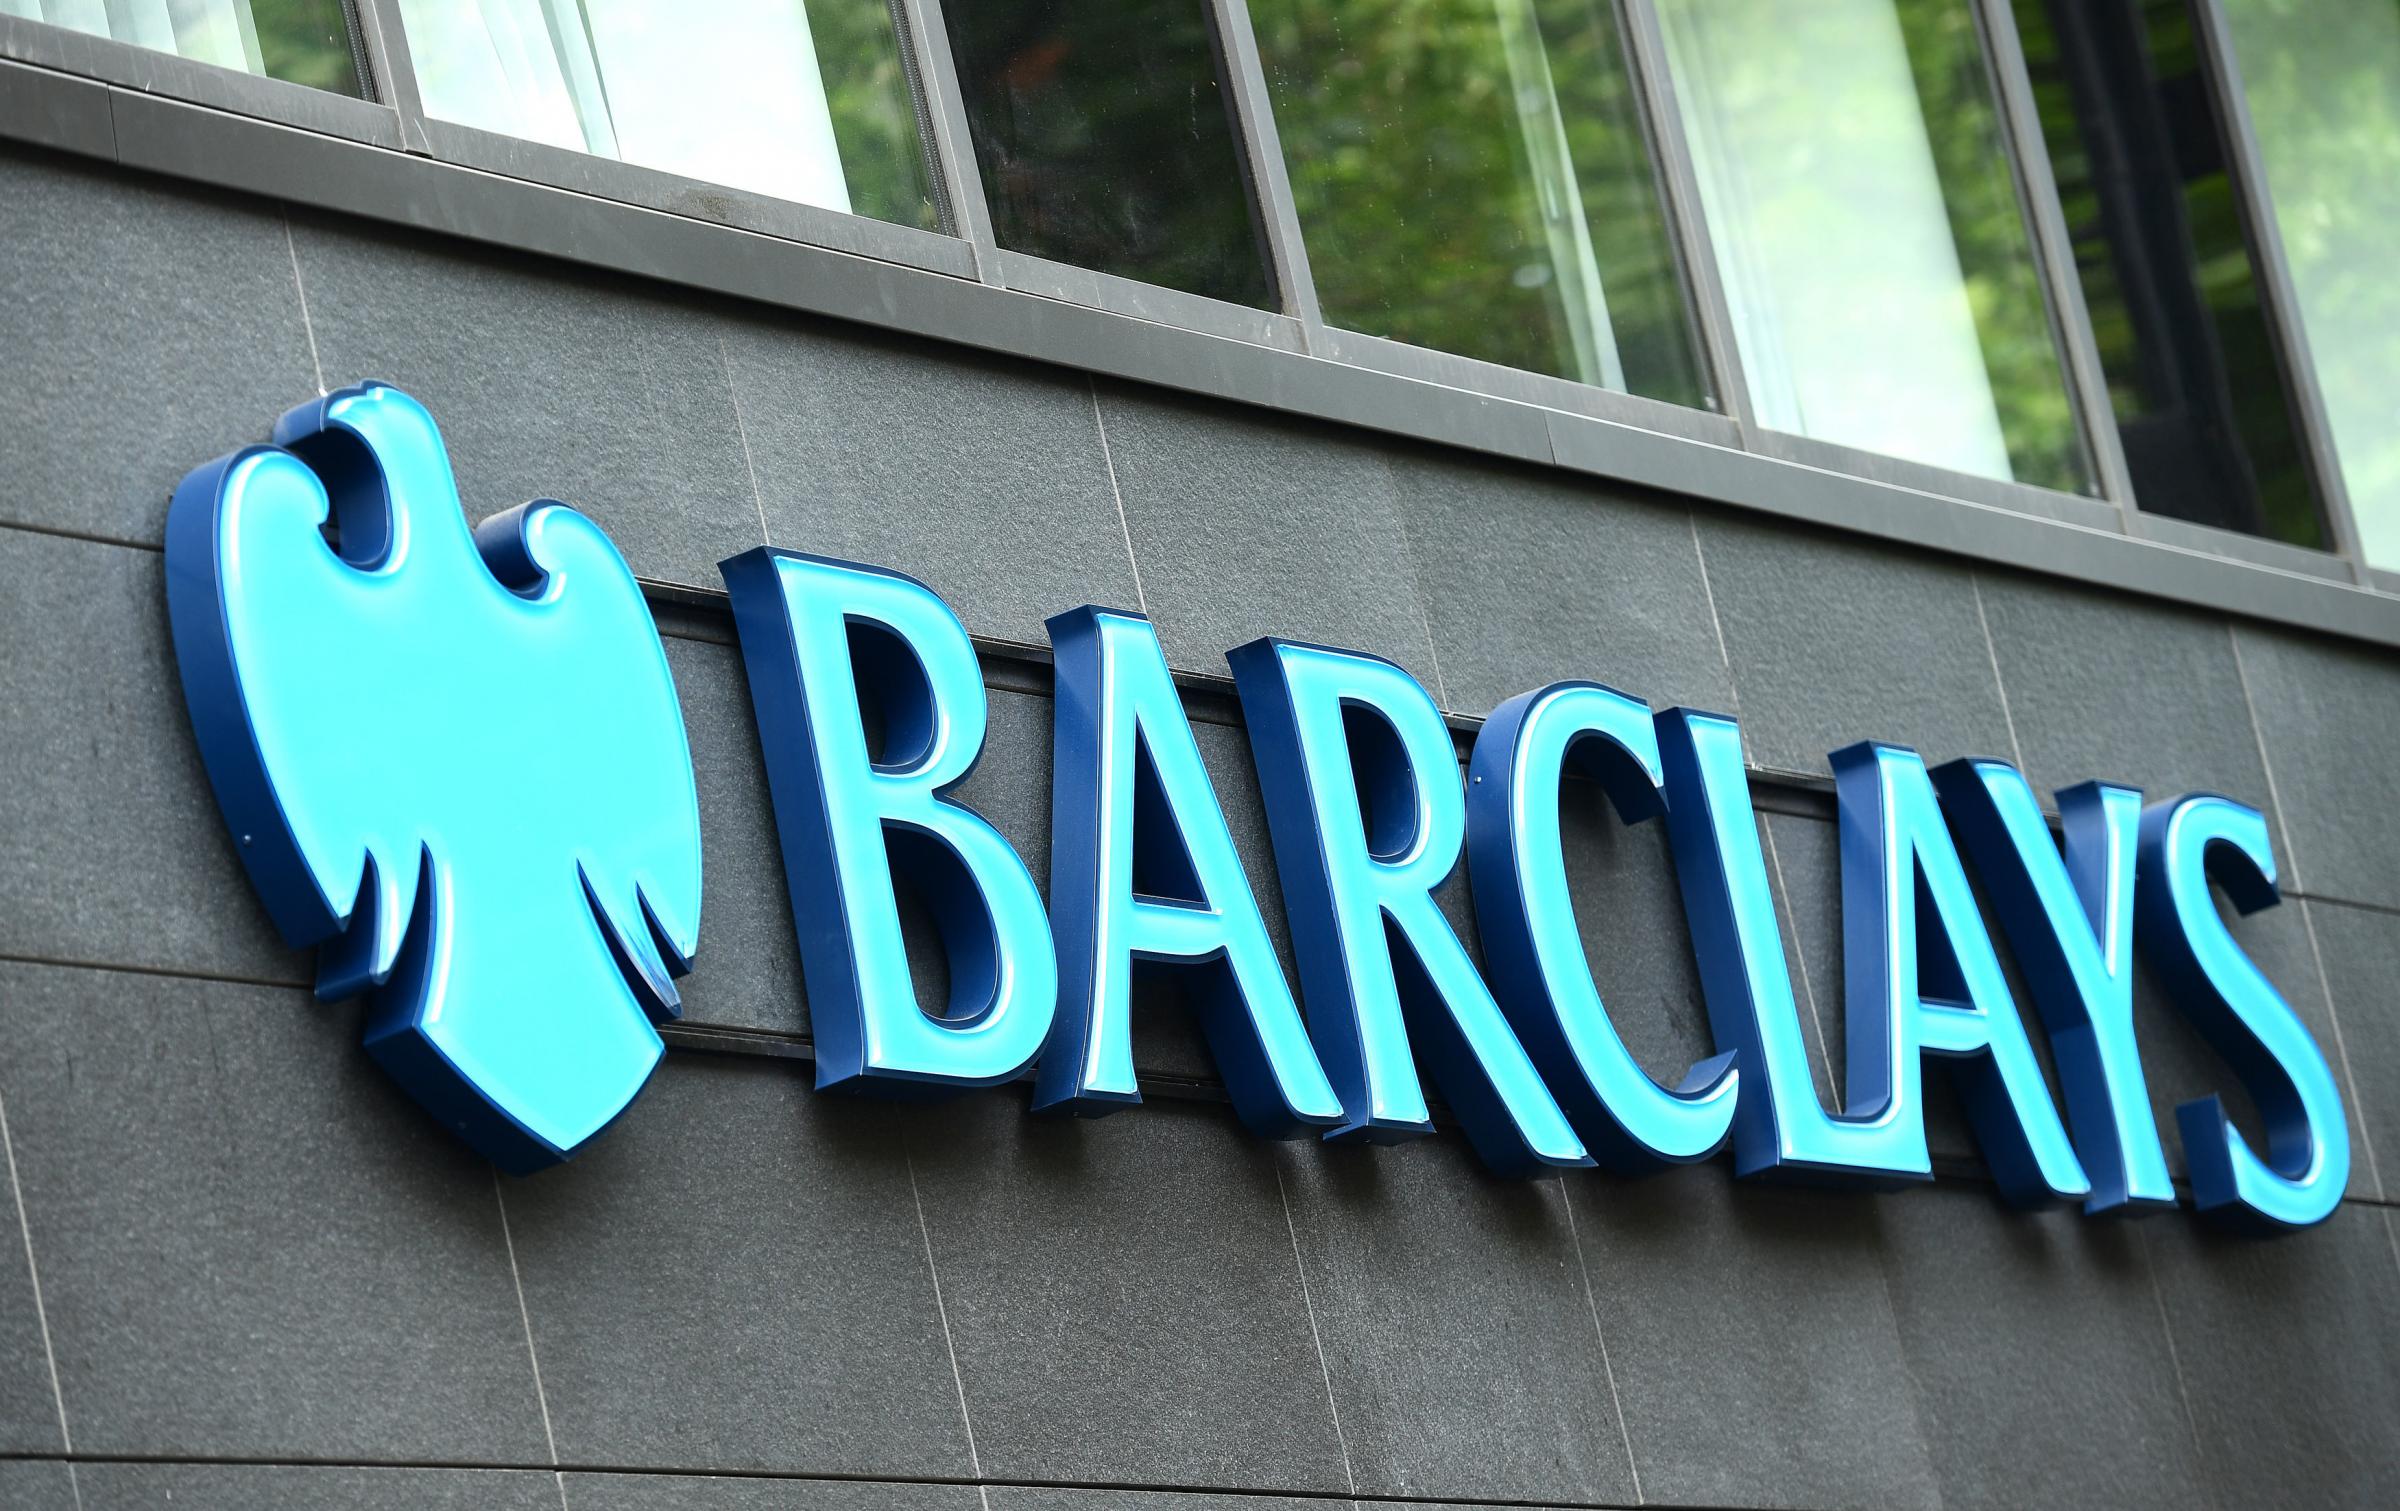 Money scams reach records says Barclays bank | News and Star